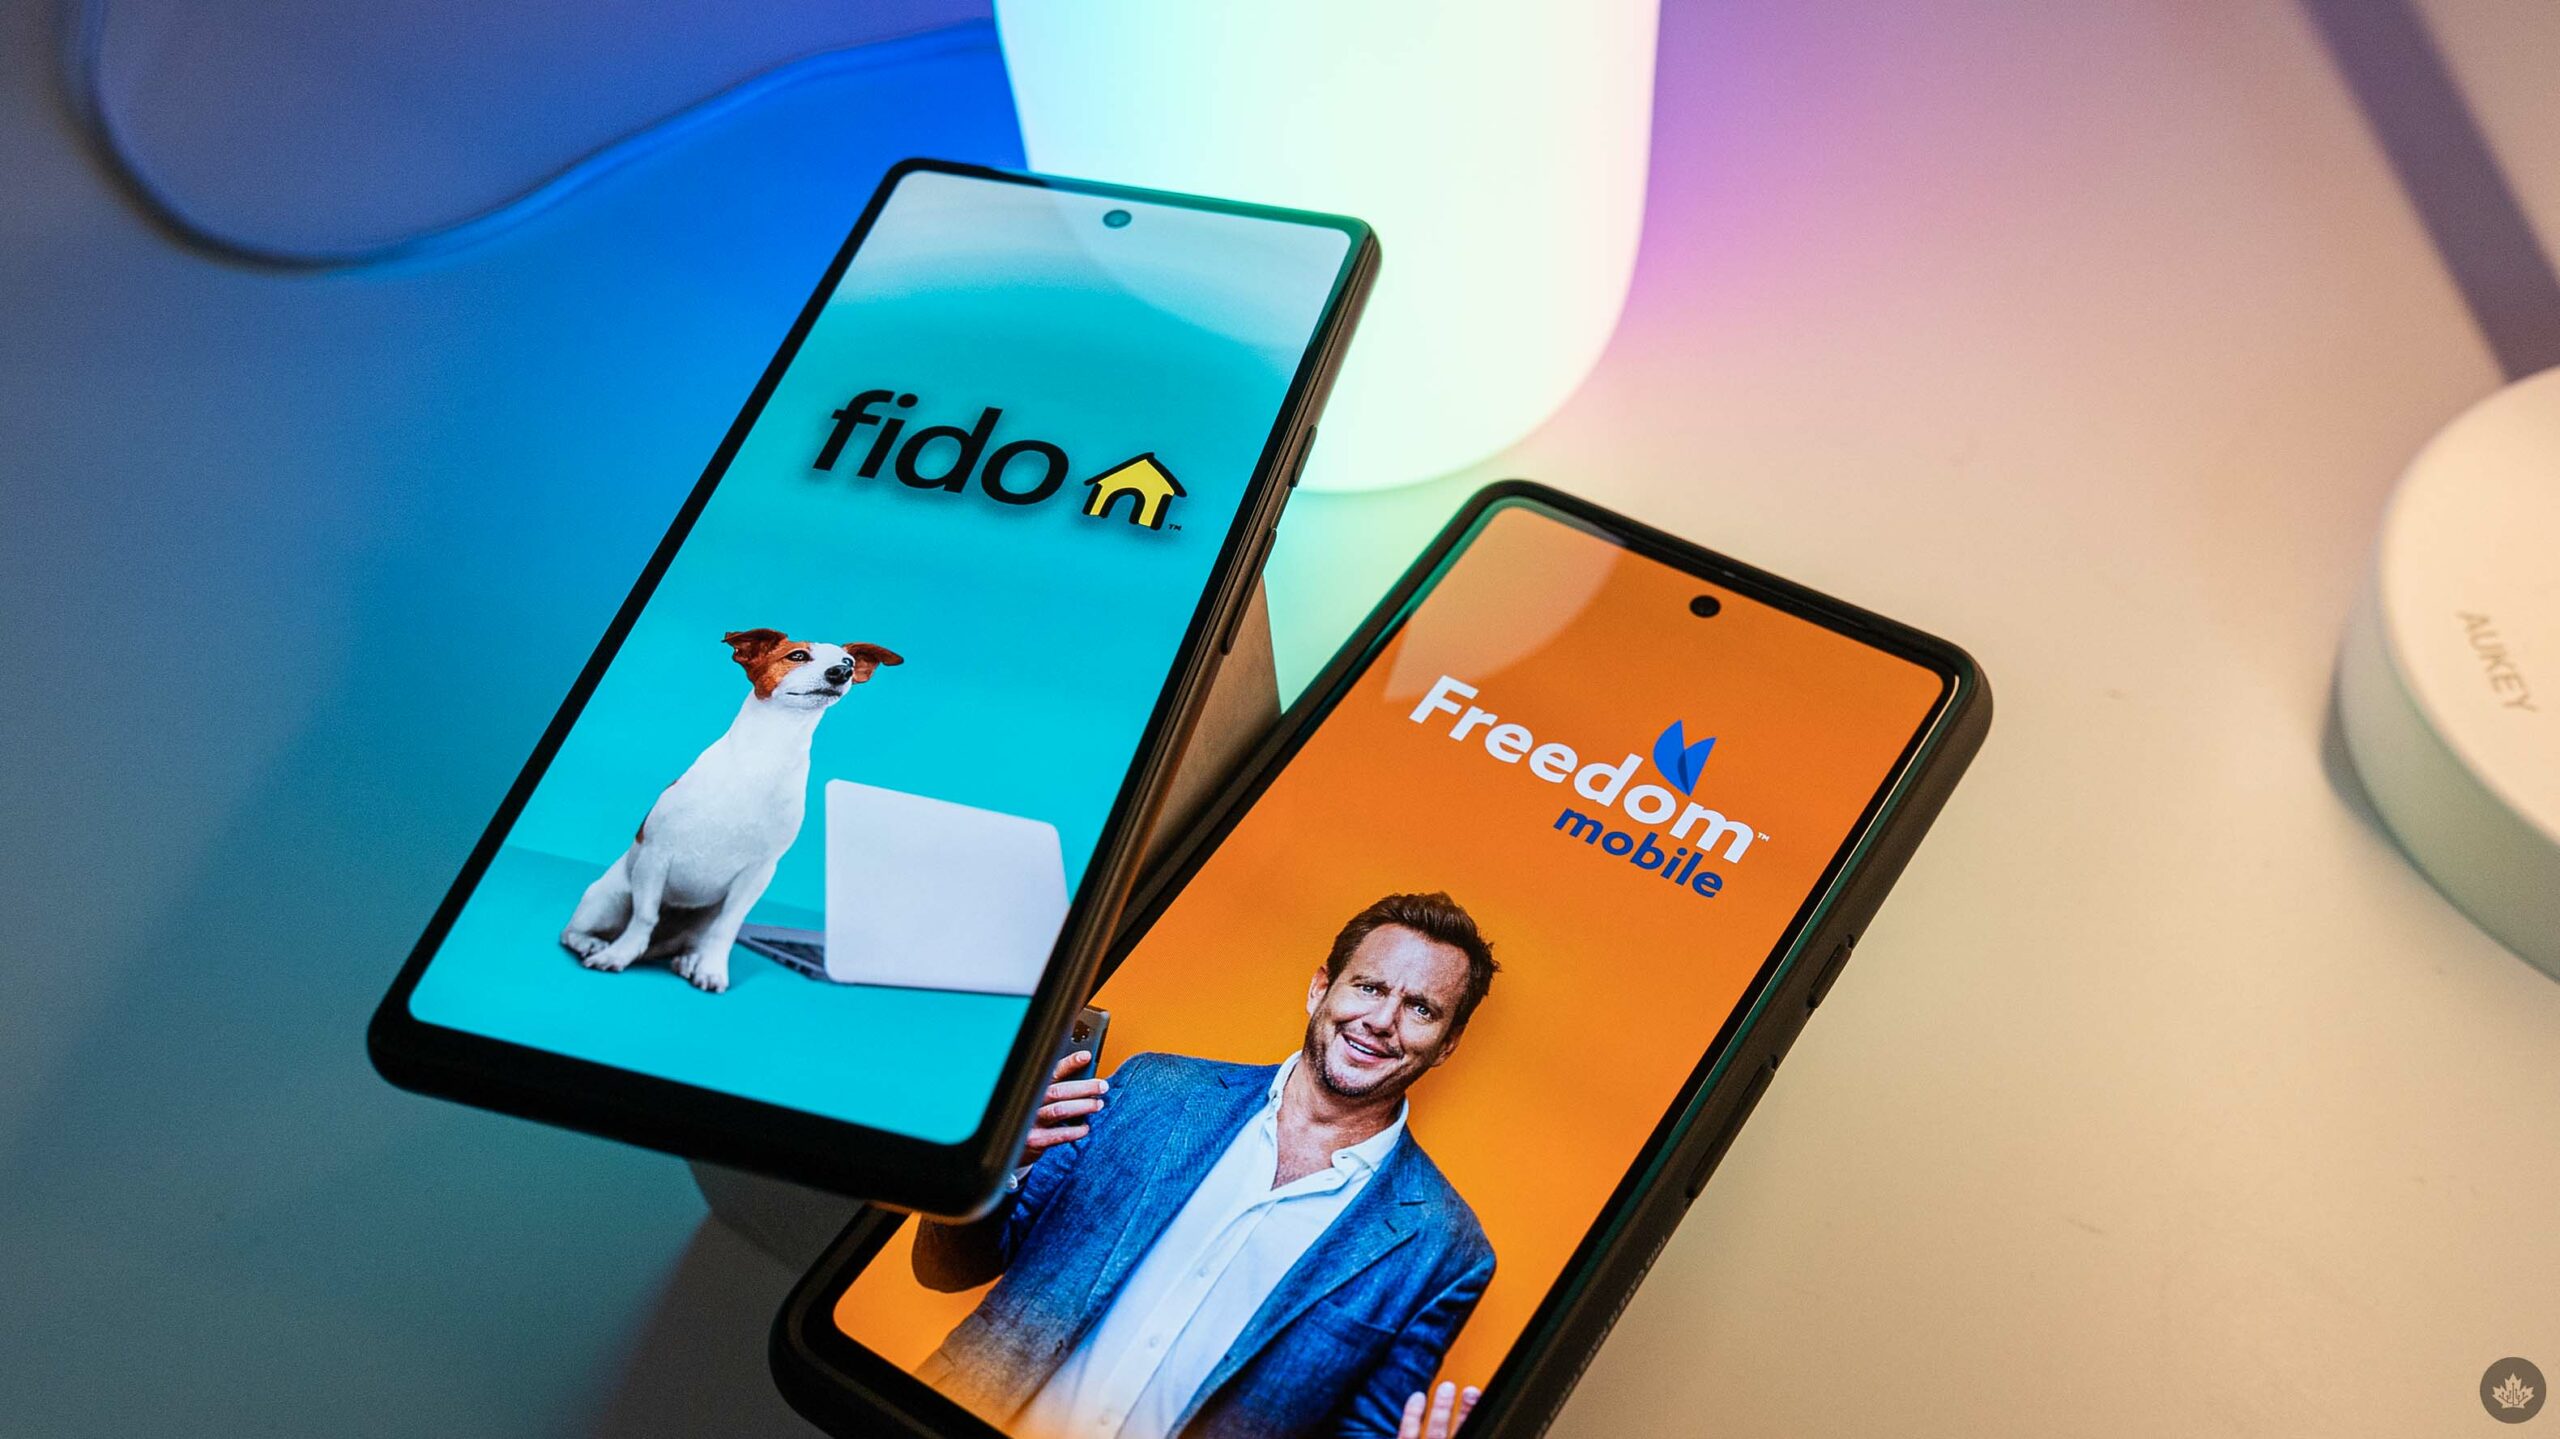 Fido and Freedom on phones.